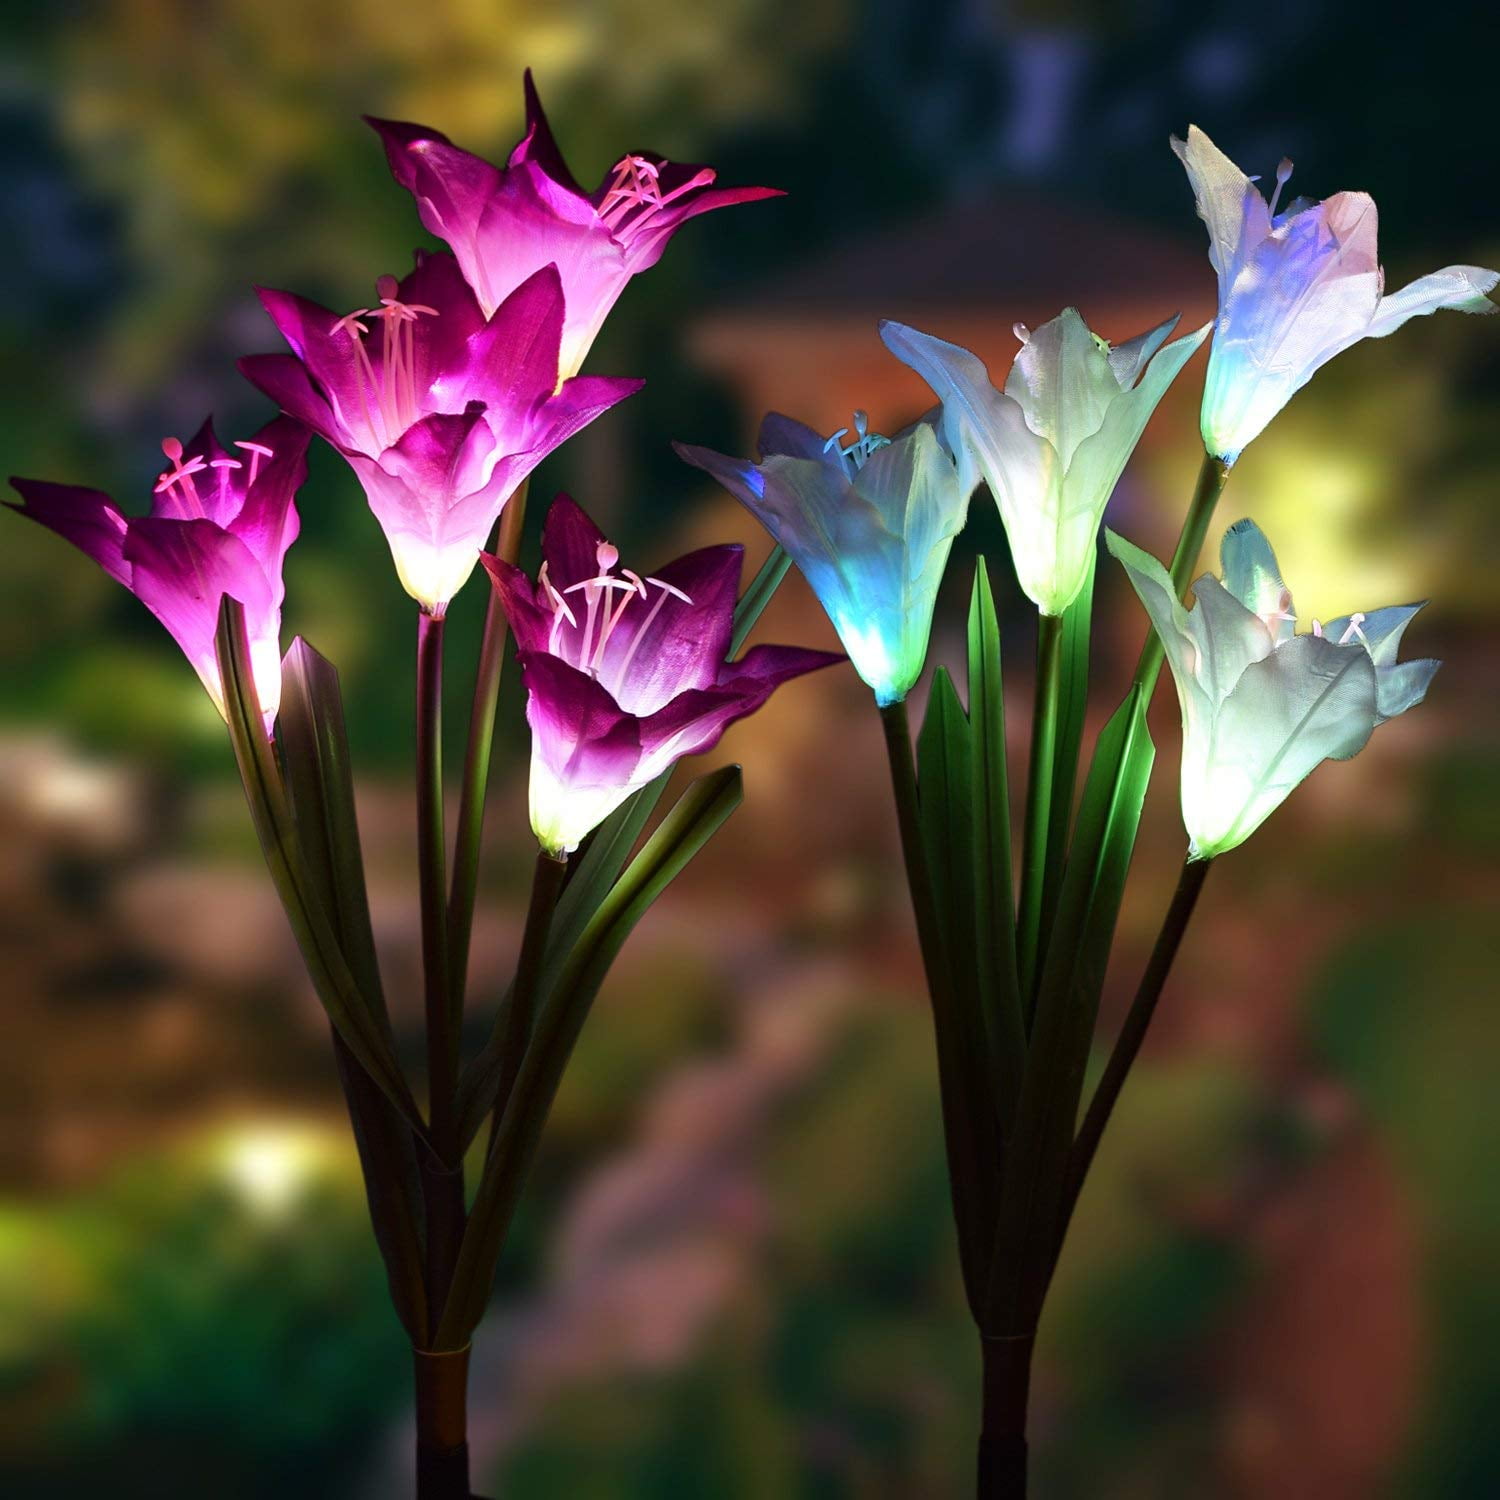 Details about   1-2X 4Heads LED Solar Luminous Lily Flowers Stake Light Garden Yard Outdoor Lamp 